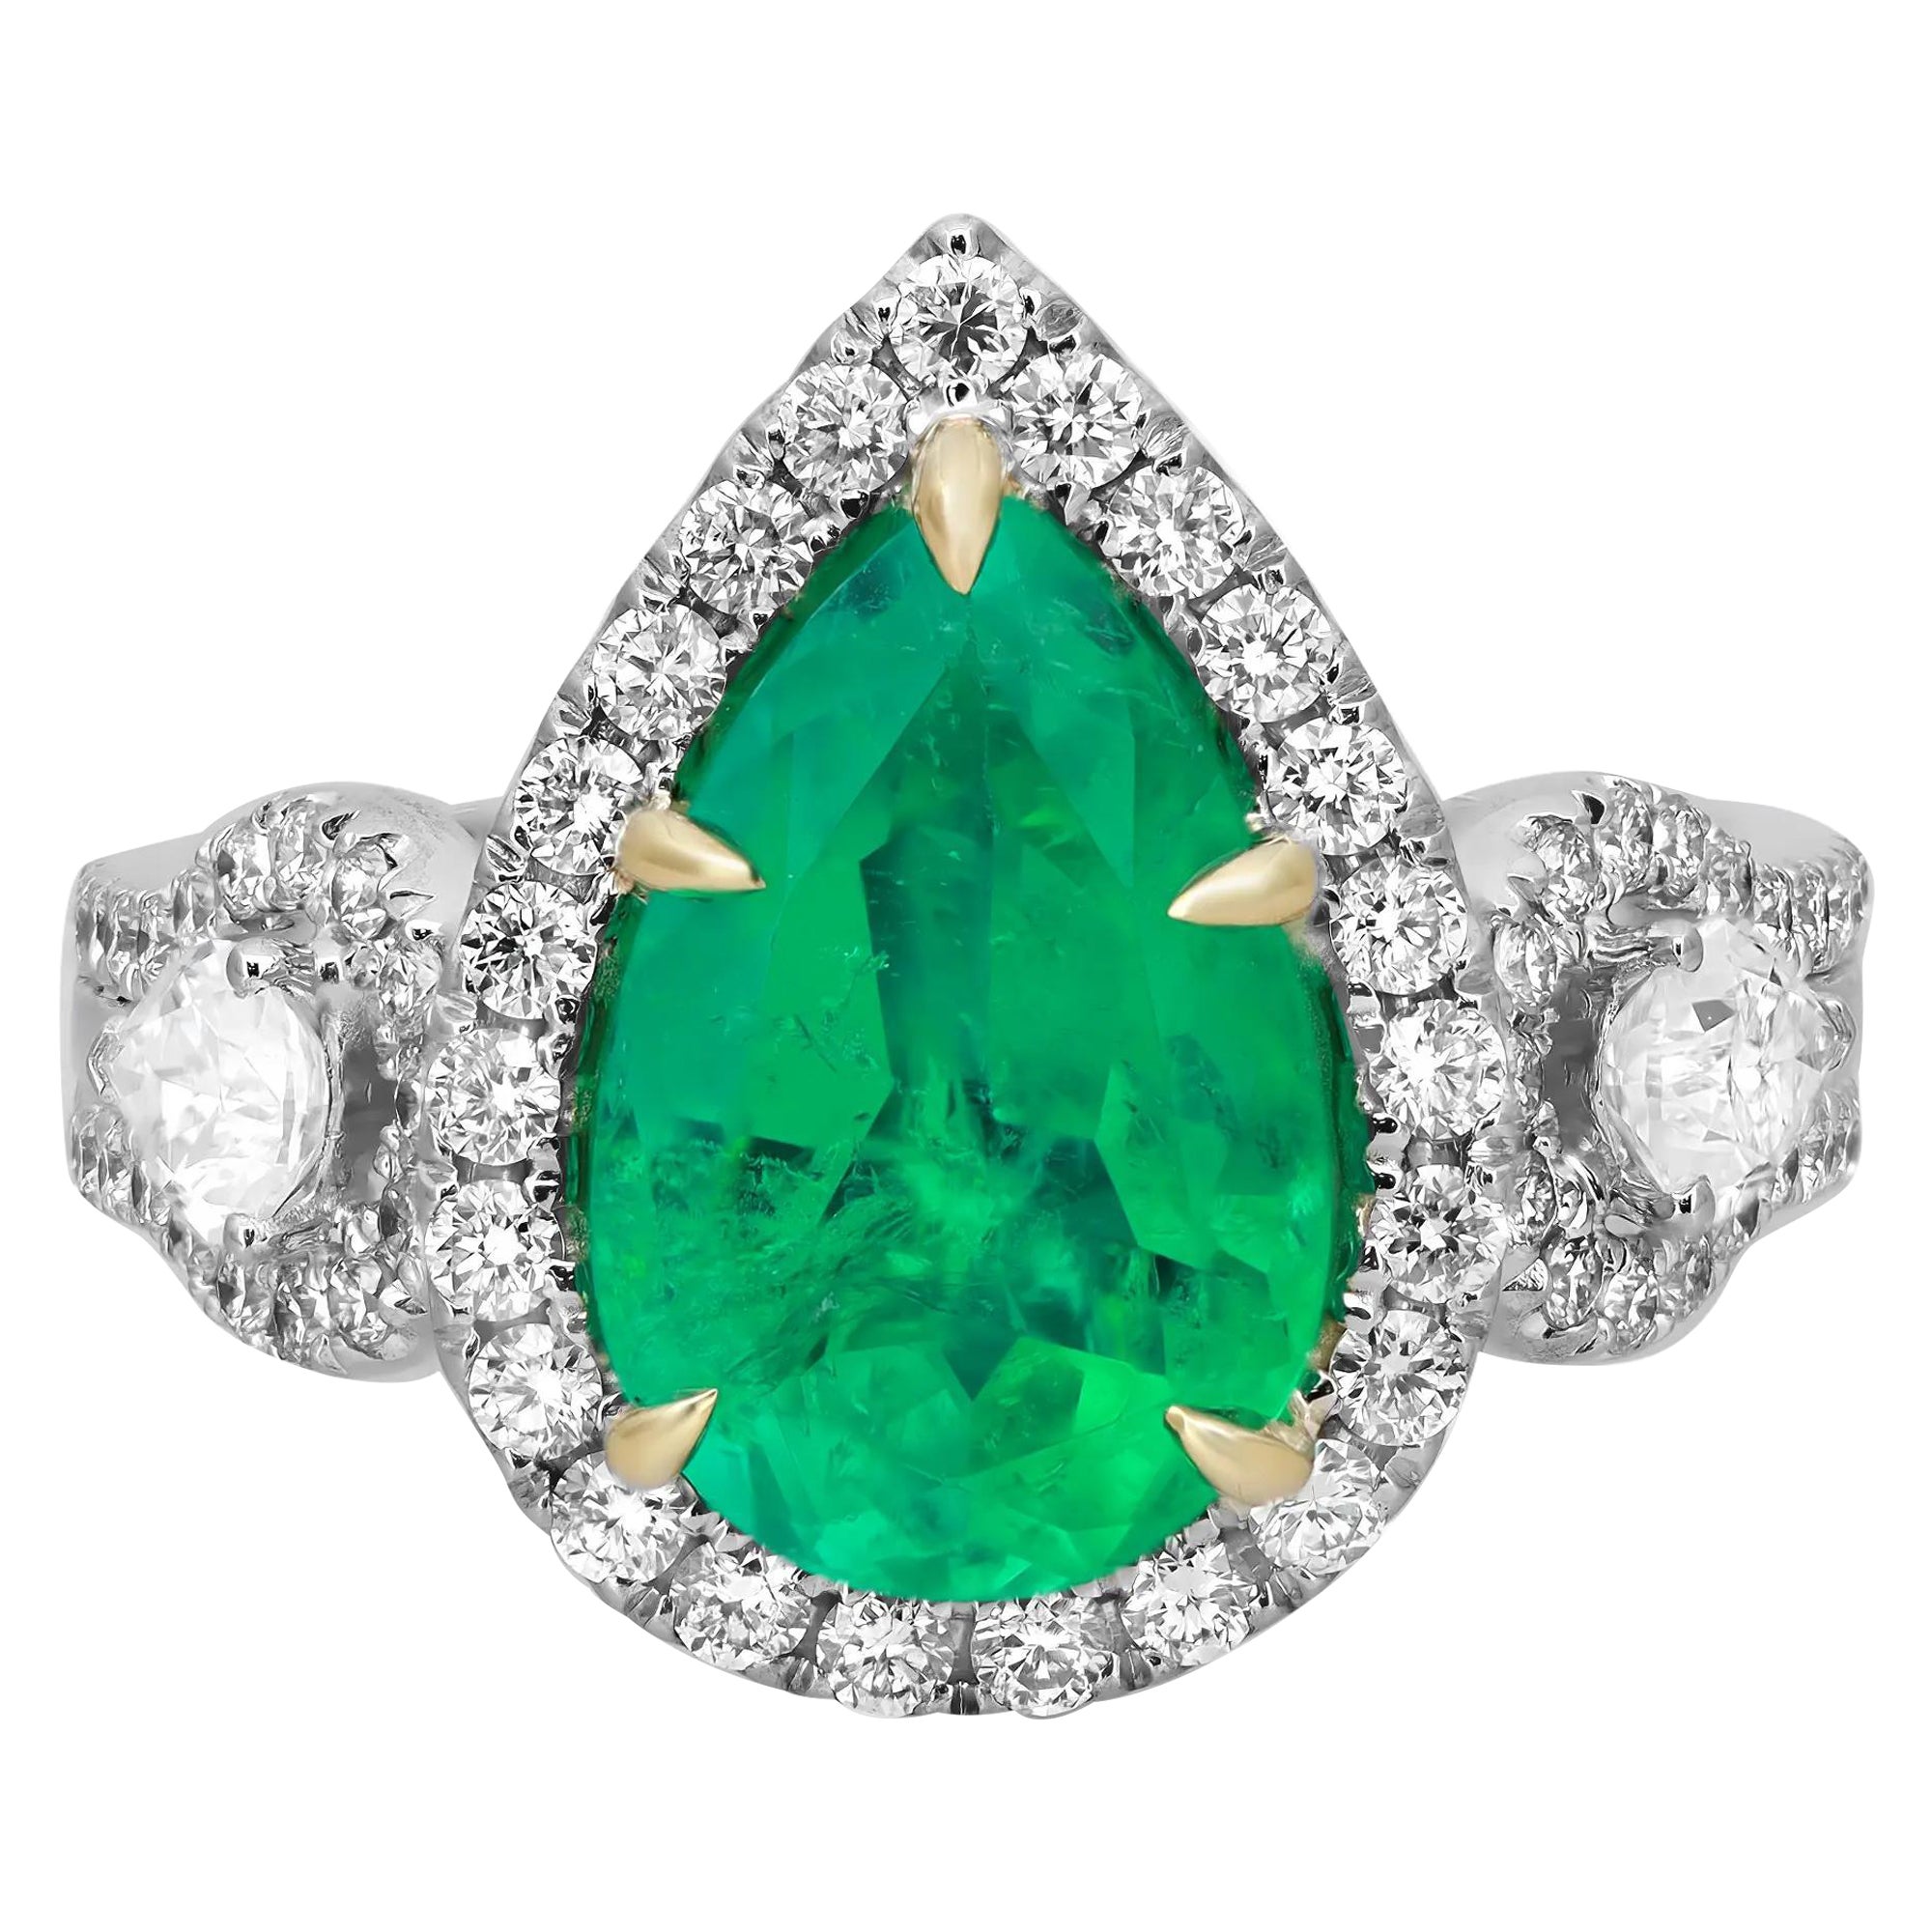 Pear Cut Colombian Emerald & Diamond Cocktail Ring 18K White Gold Size 6